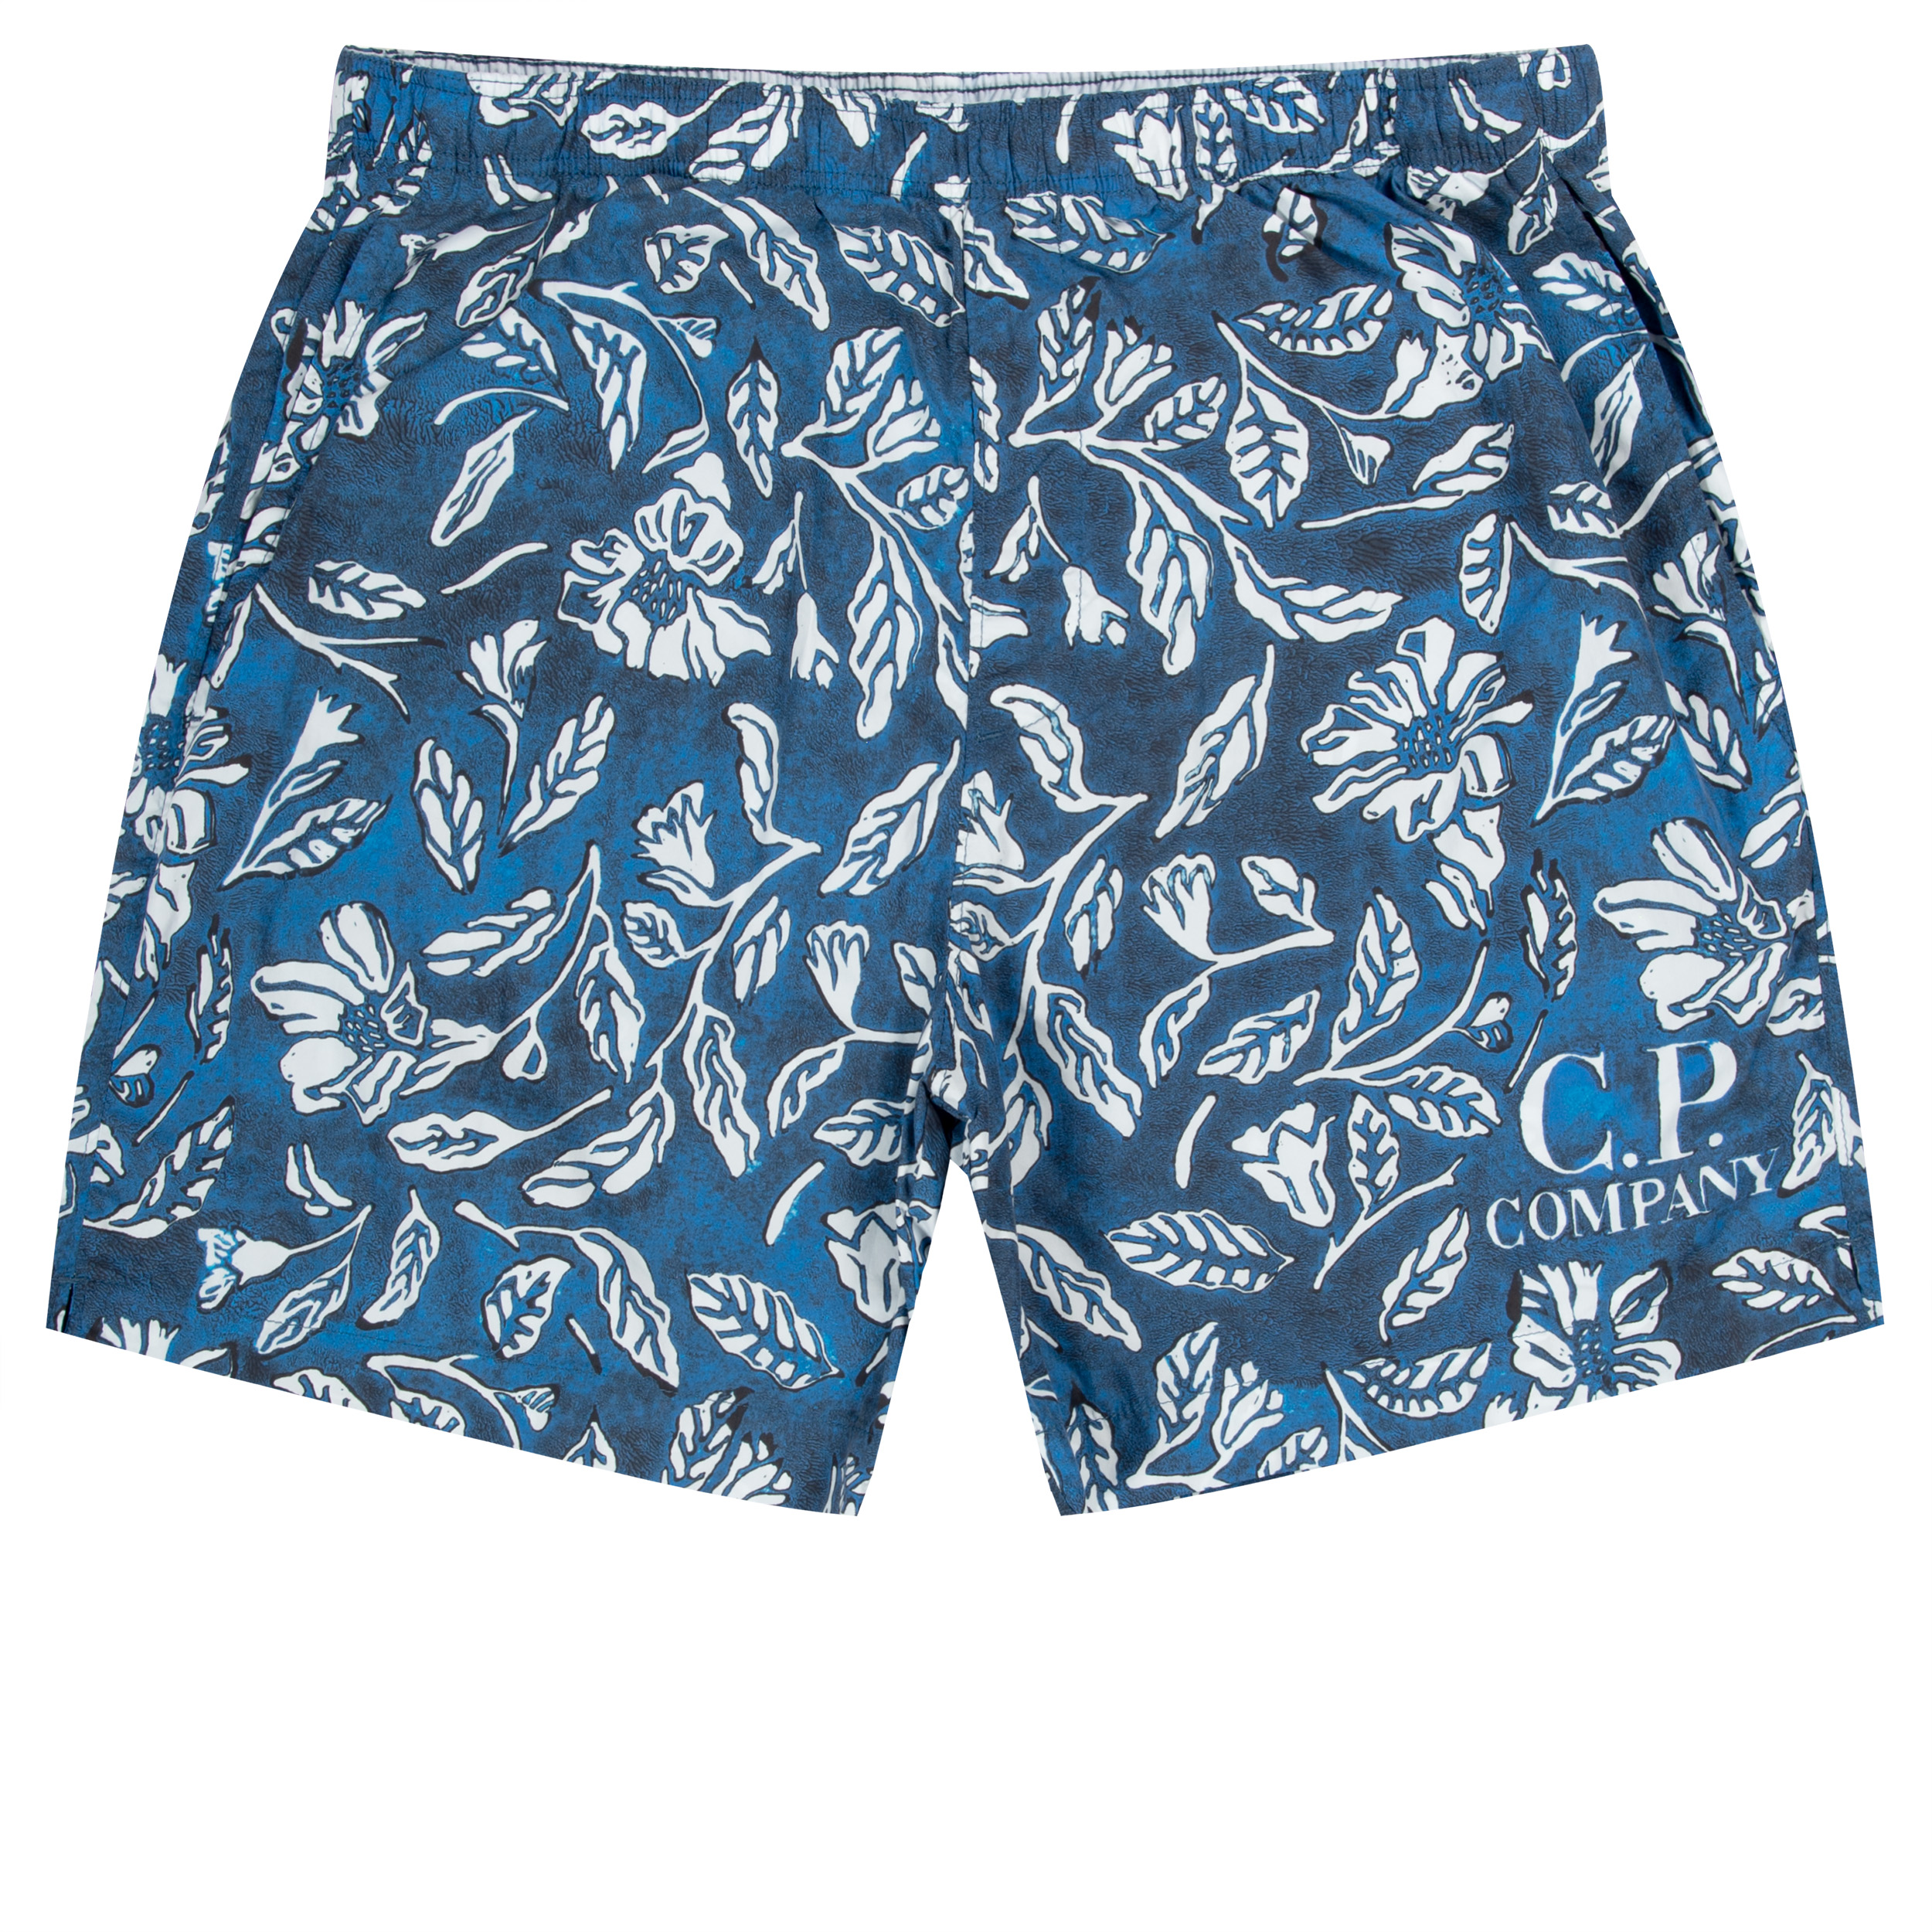 C.P. Company All-Over Floral Patterned Swim Shorts Medieval Blue